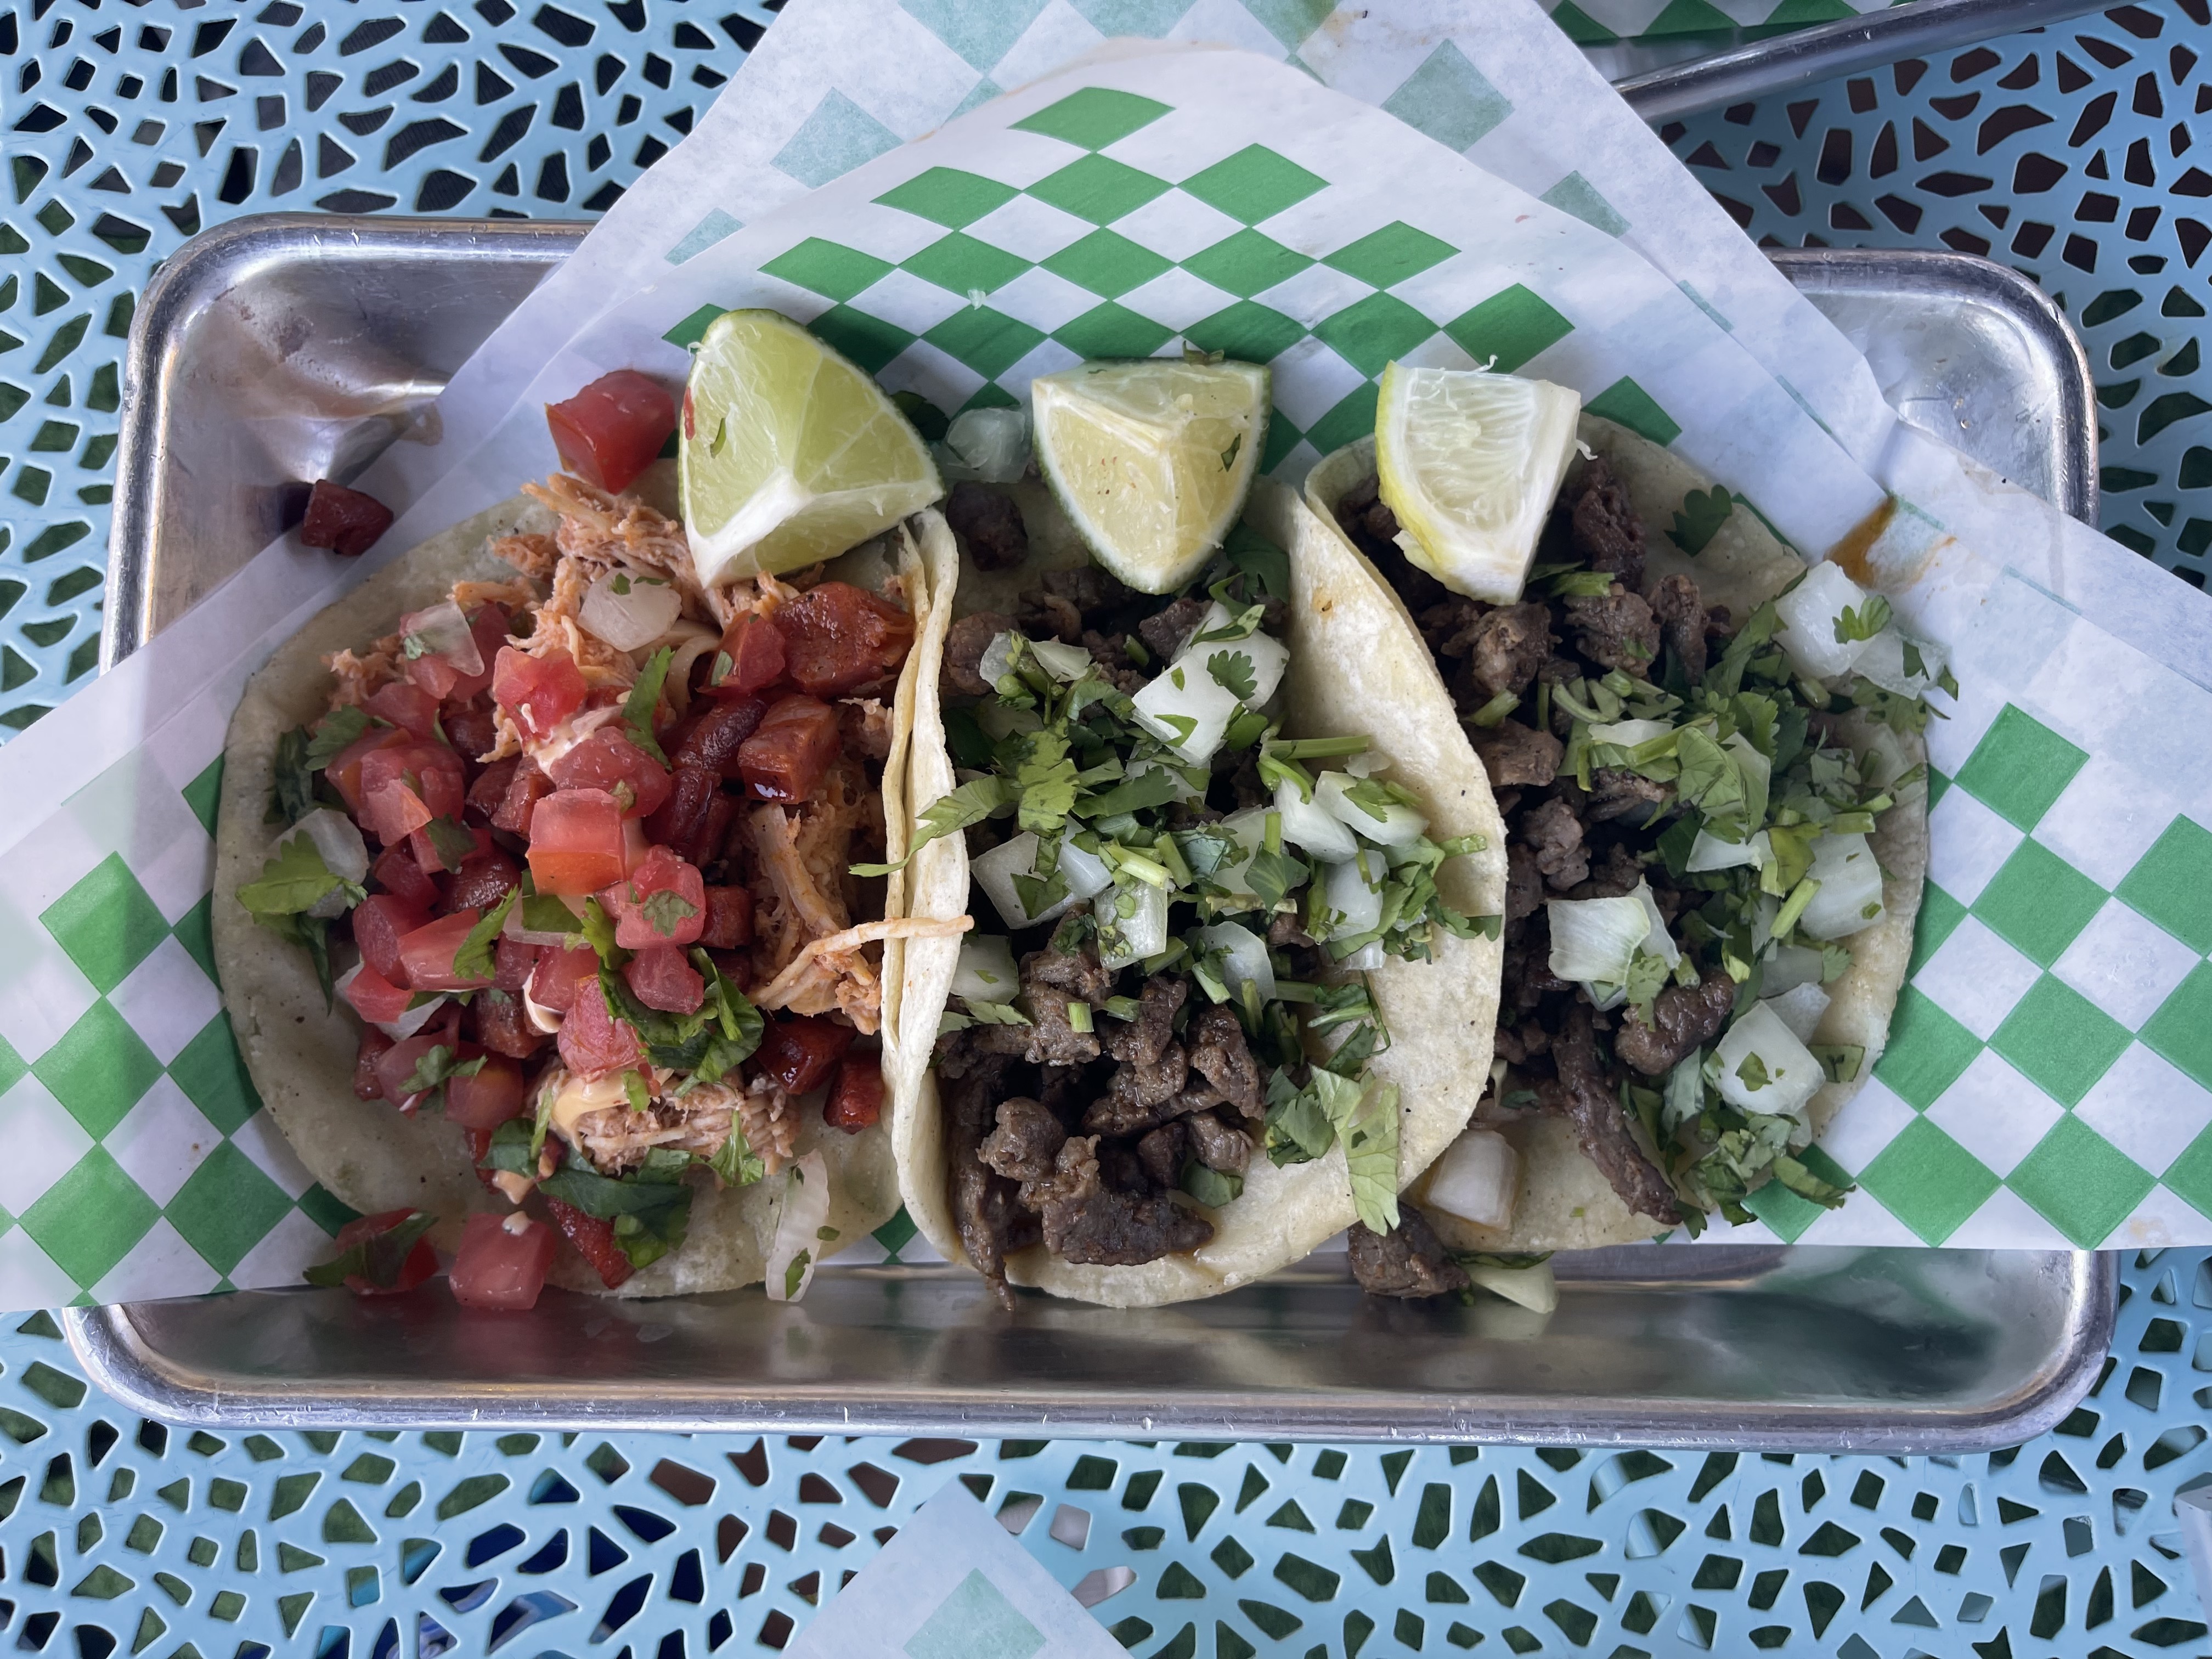 los chaos tacos, Ybor city, foodie in tampa, places to eat in tampa